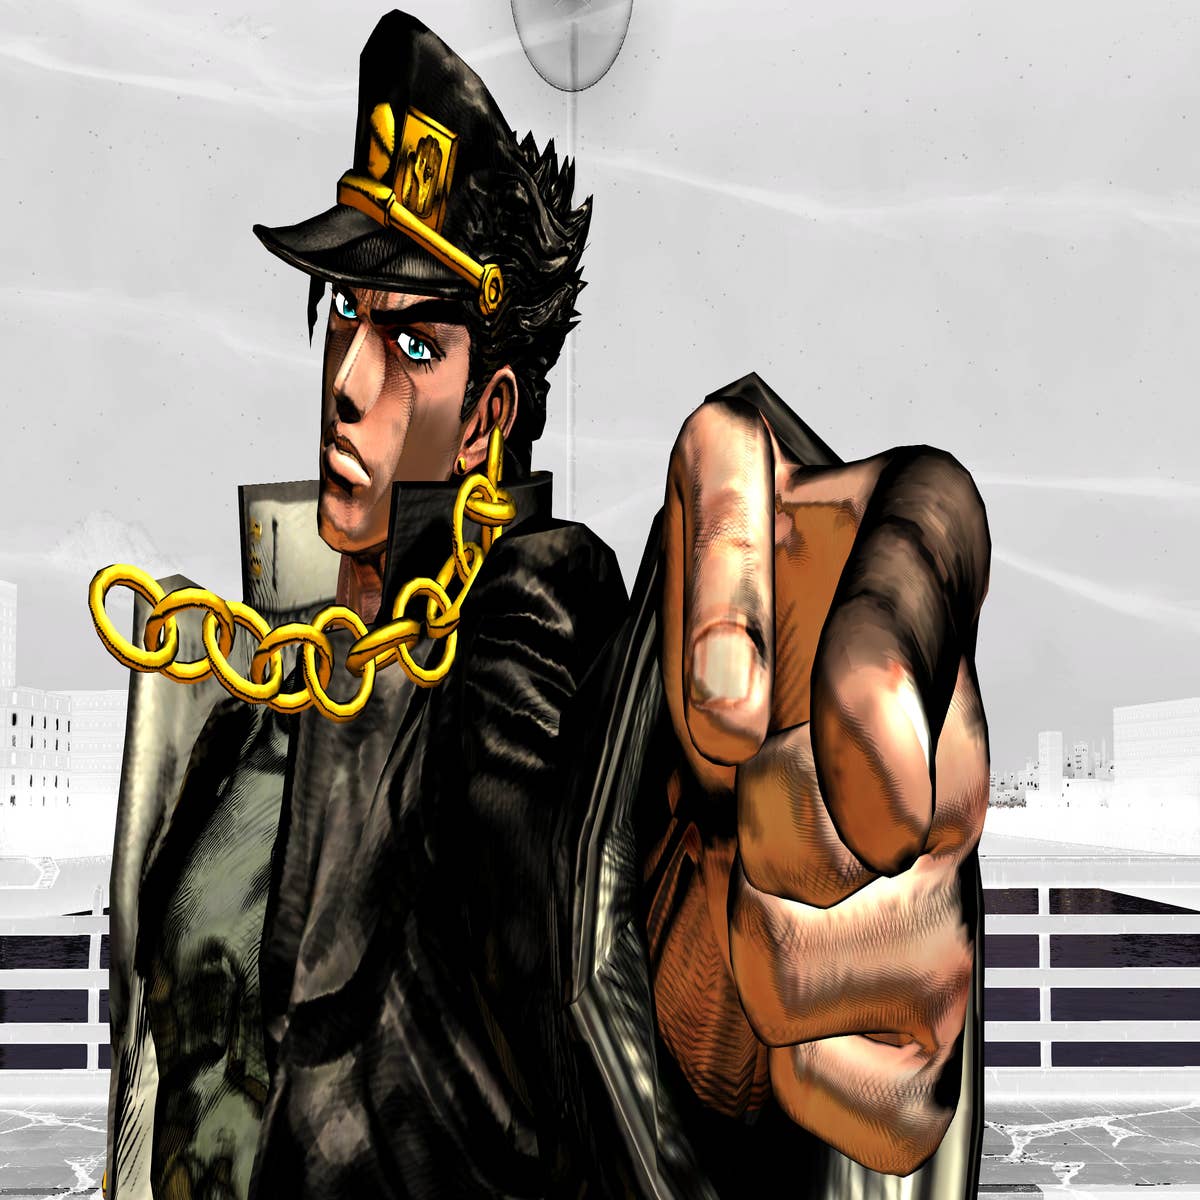 JoJo's Bizarre Adventure and Hot Wheels coming to PC Game Pass